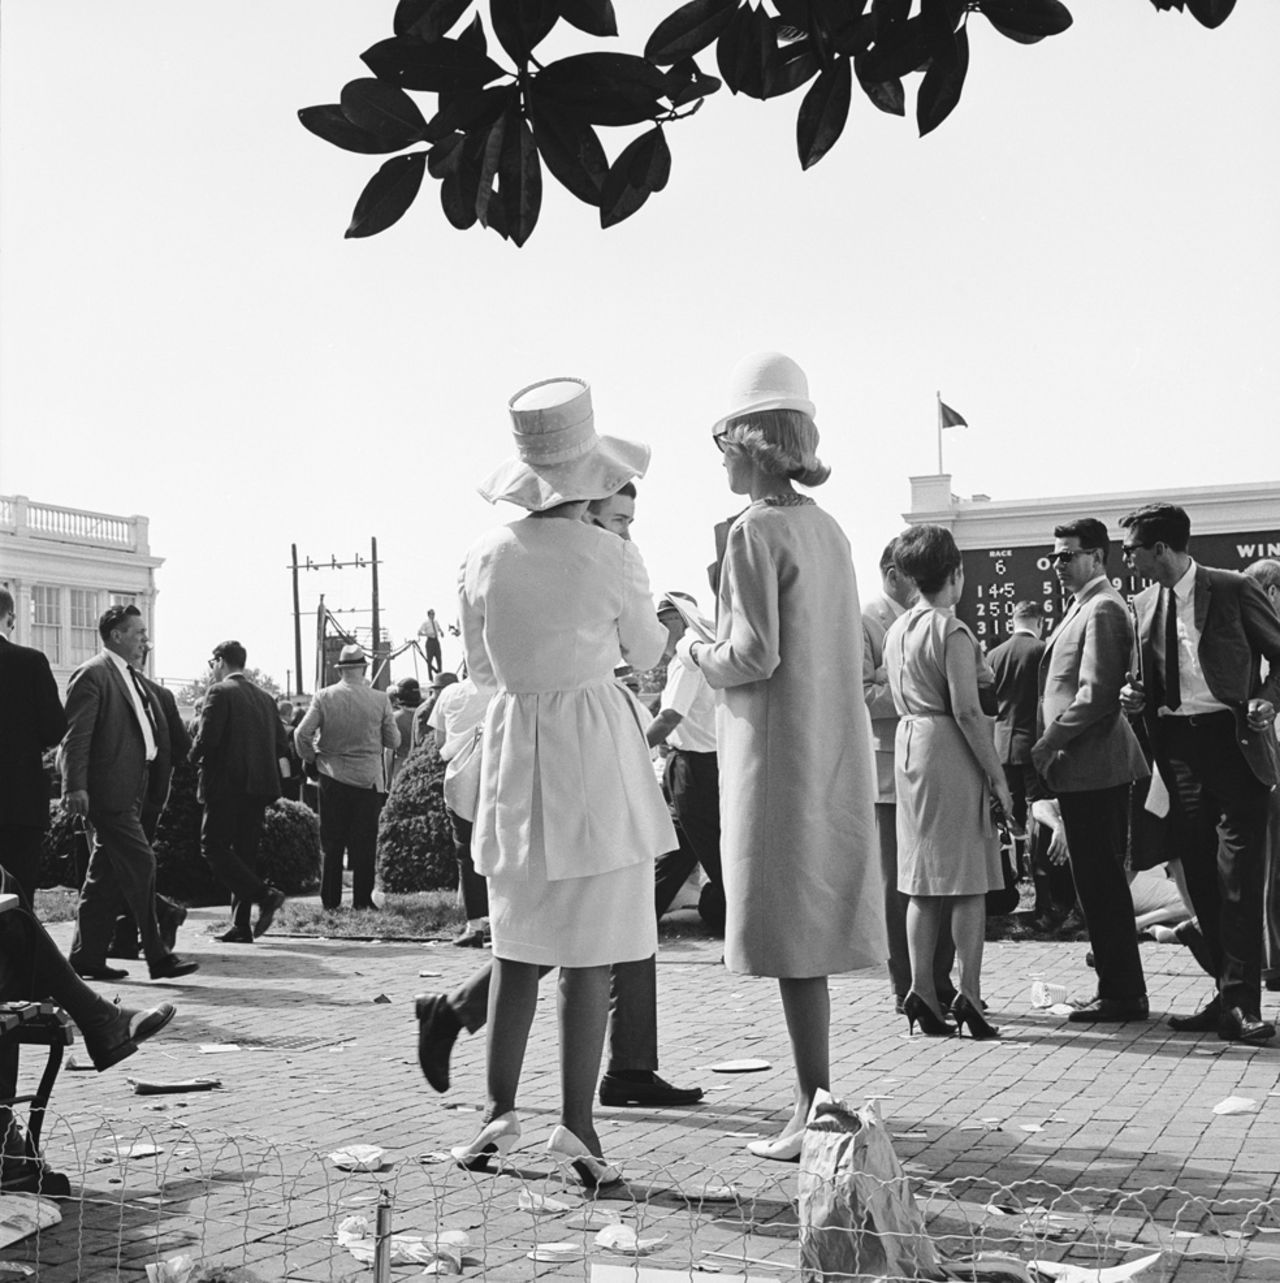 In the 1960s, hemlines were on the rise. Meanwhile, on the other side of the globe at Australia's Melbourne Cup, model Jean Shrimpton was causing a stir in a miniskirt that <a href="http://edition.cnn.com/2012/11/01/sport/jean-shrimpton-melbourne-cup-fashion/">"stopped the nation." </a><br />"By the time you get to the 1960s wearing hats was no longer typical," said Goodlet.<br />"But the Derby keeps this tradition -- even when other social occasions don't." <br />